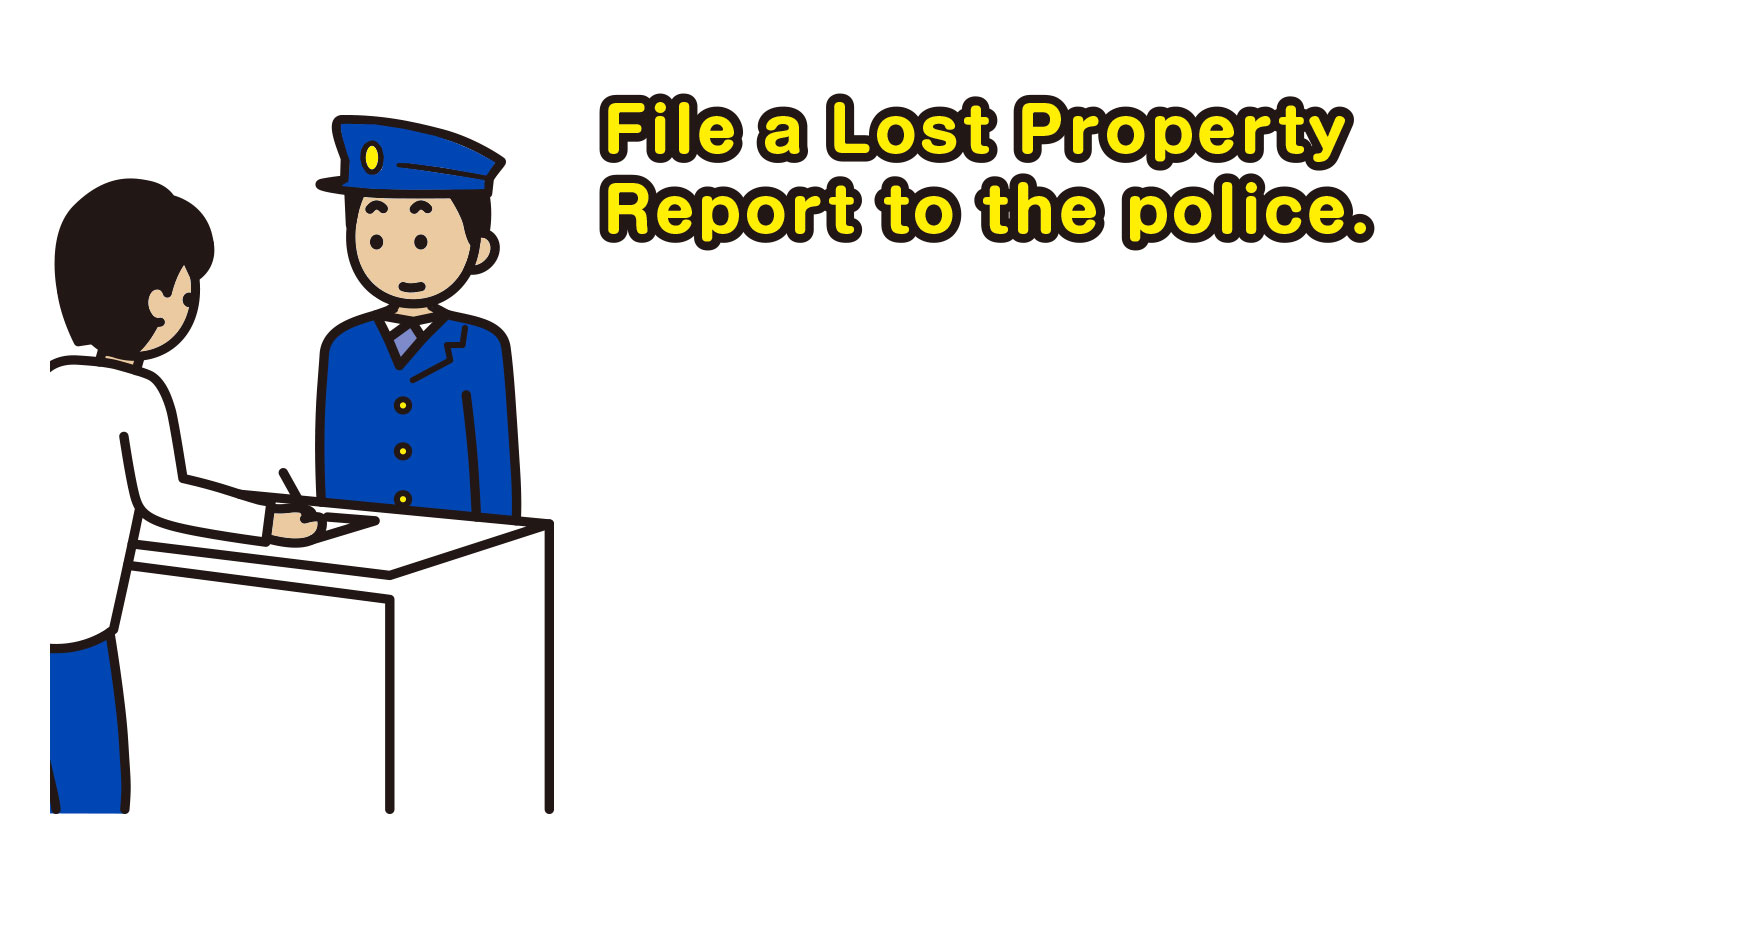 File a Lost Property Report to the police.